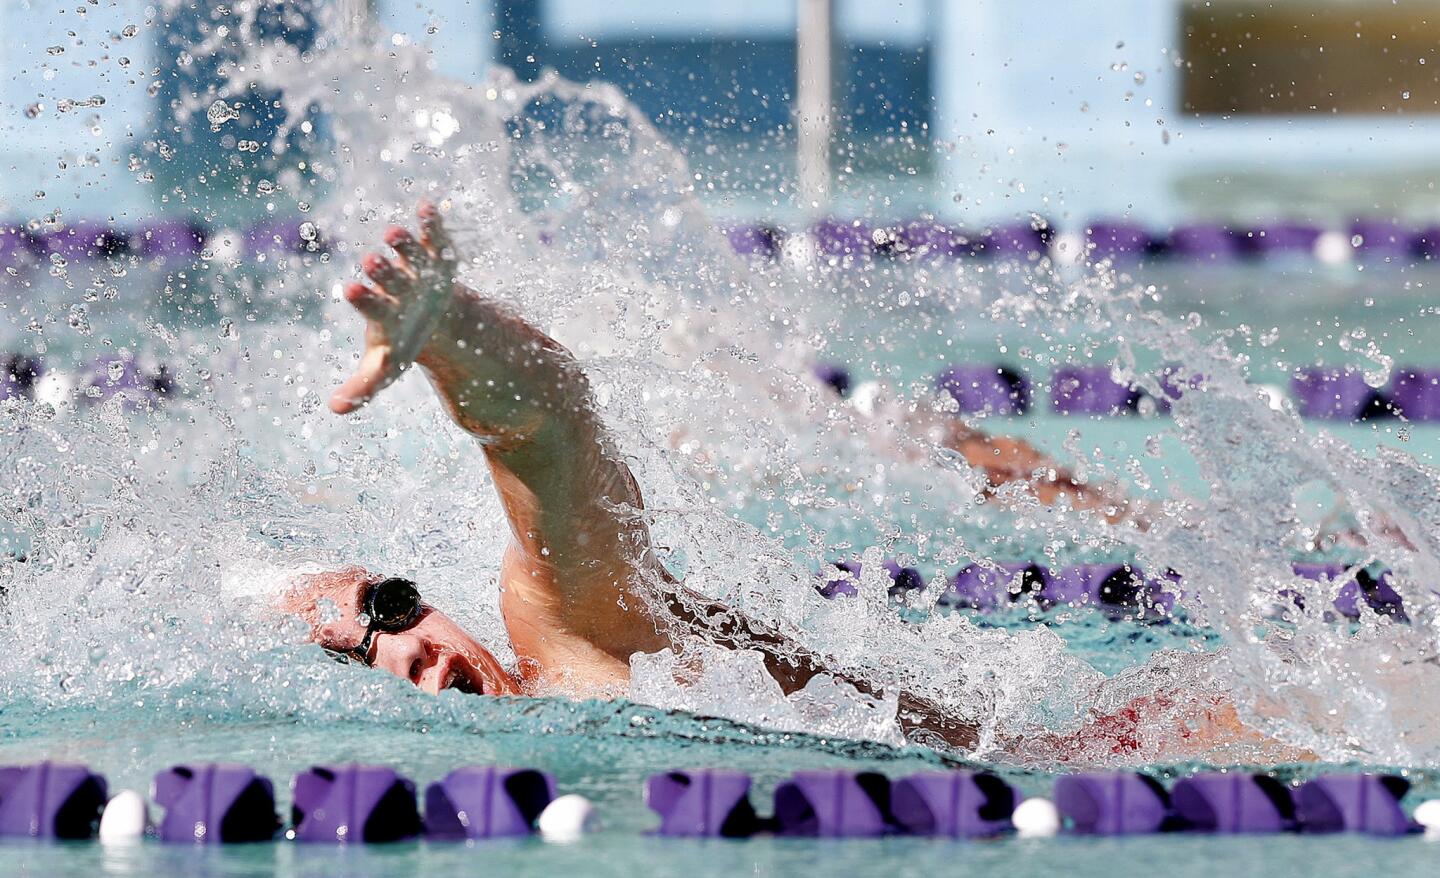 Burroughs Ema Nathan swims neck-and-neck with Hoover's Lusin Yengibaryan in a Pacific League dual swim meet at Hoover High School on Wednesday, March 13, 2019.